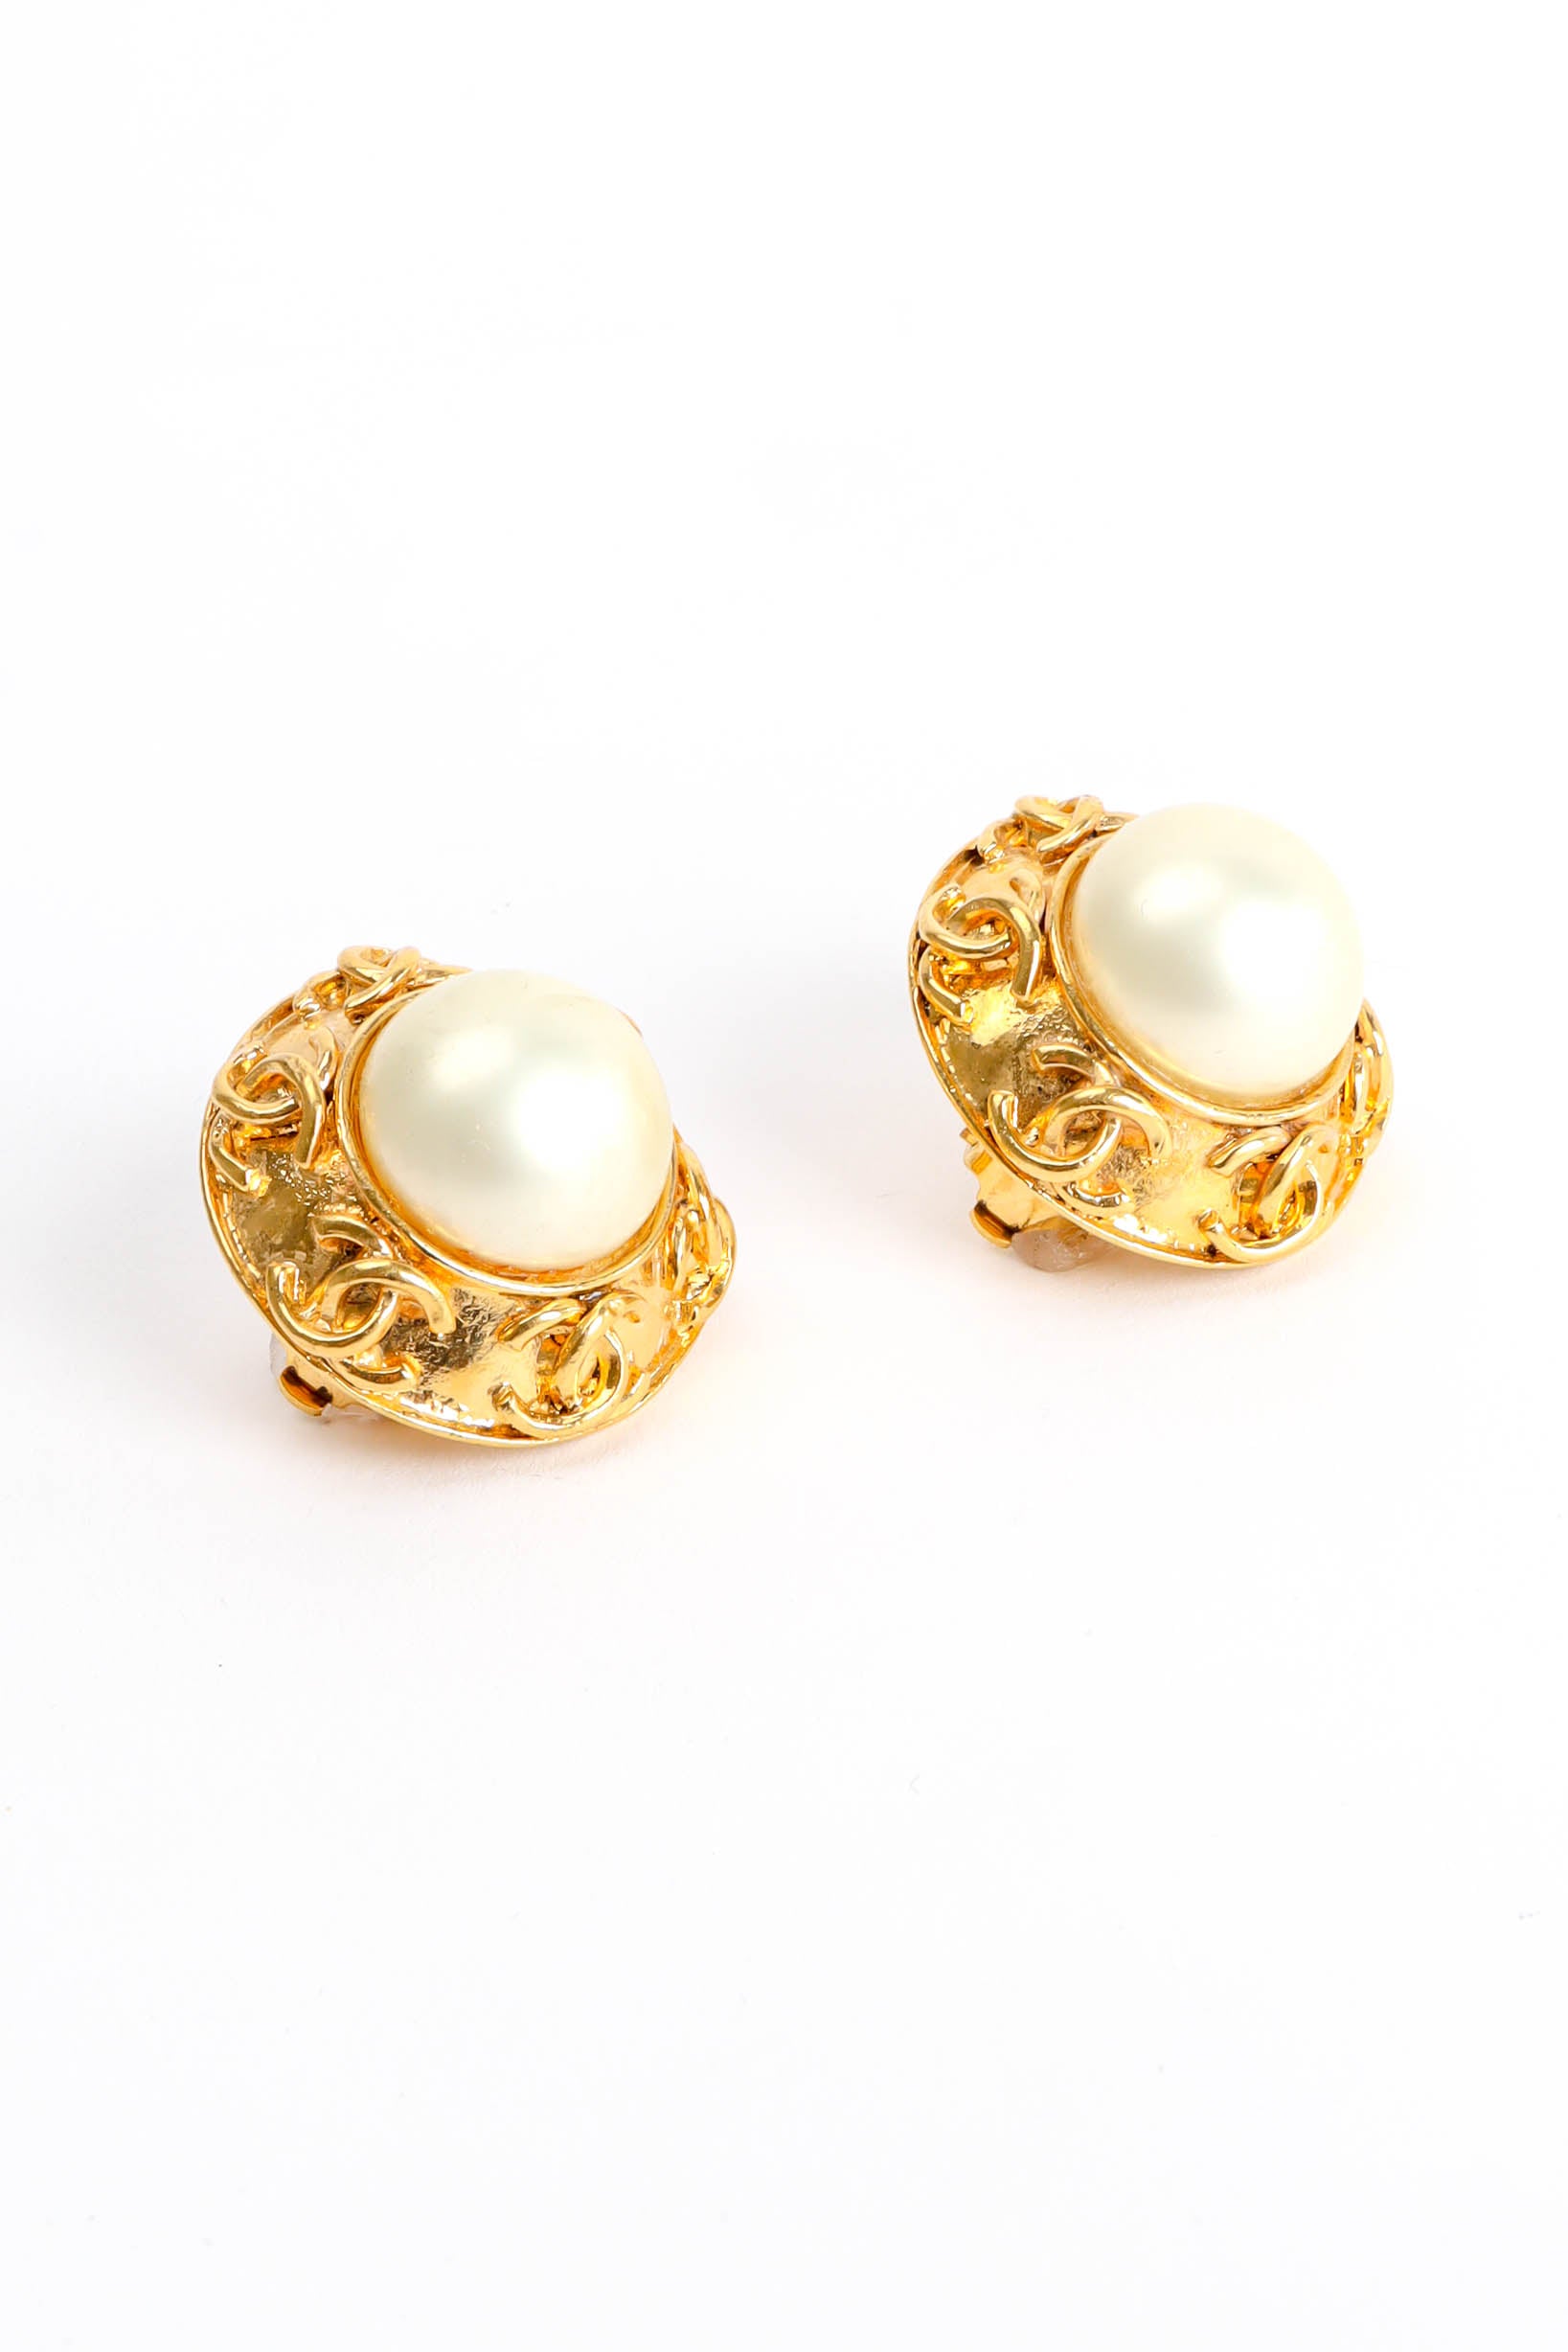 Chanel Vintage White Imitation Pearl And Gold Metal CC Earrings